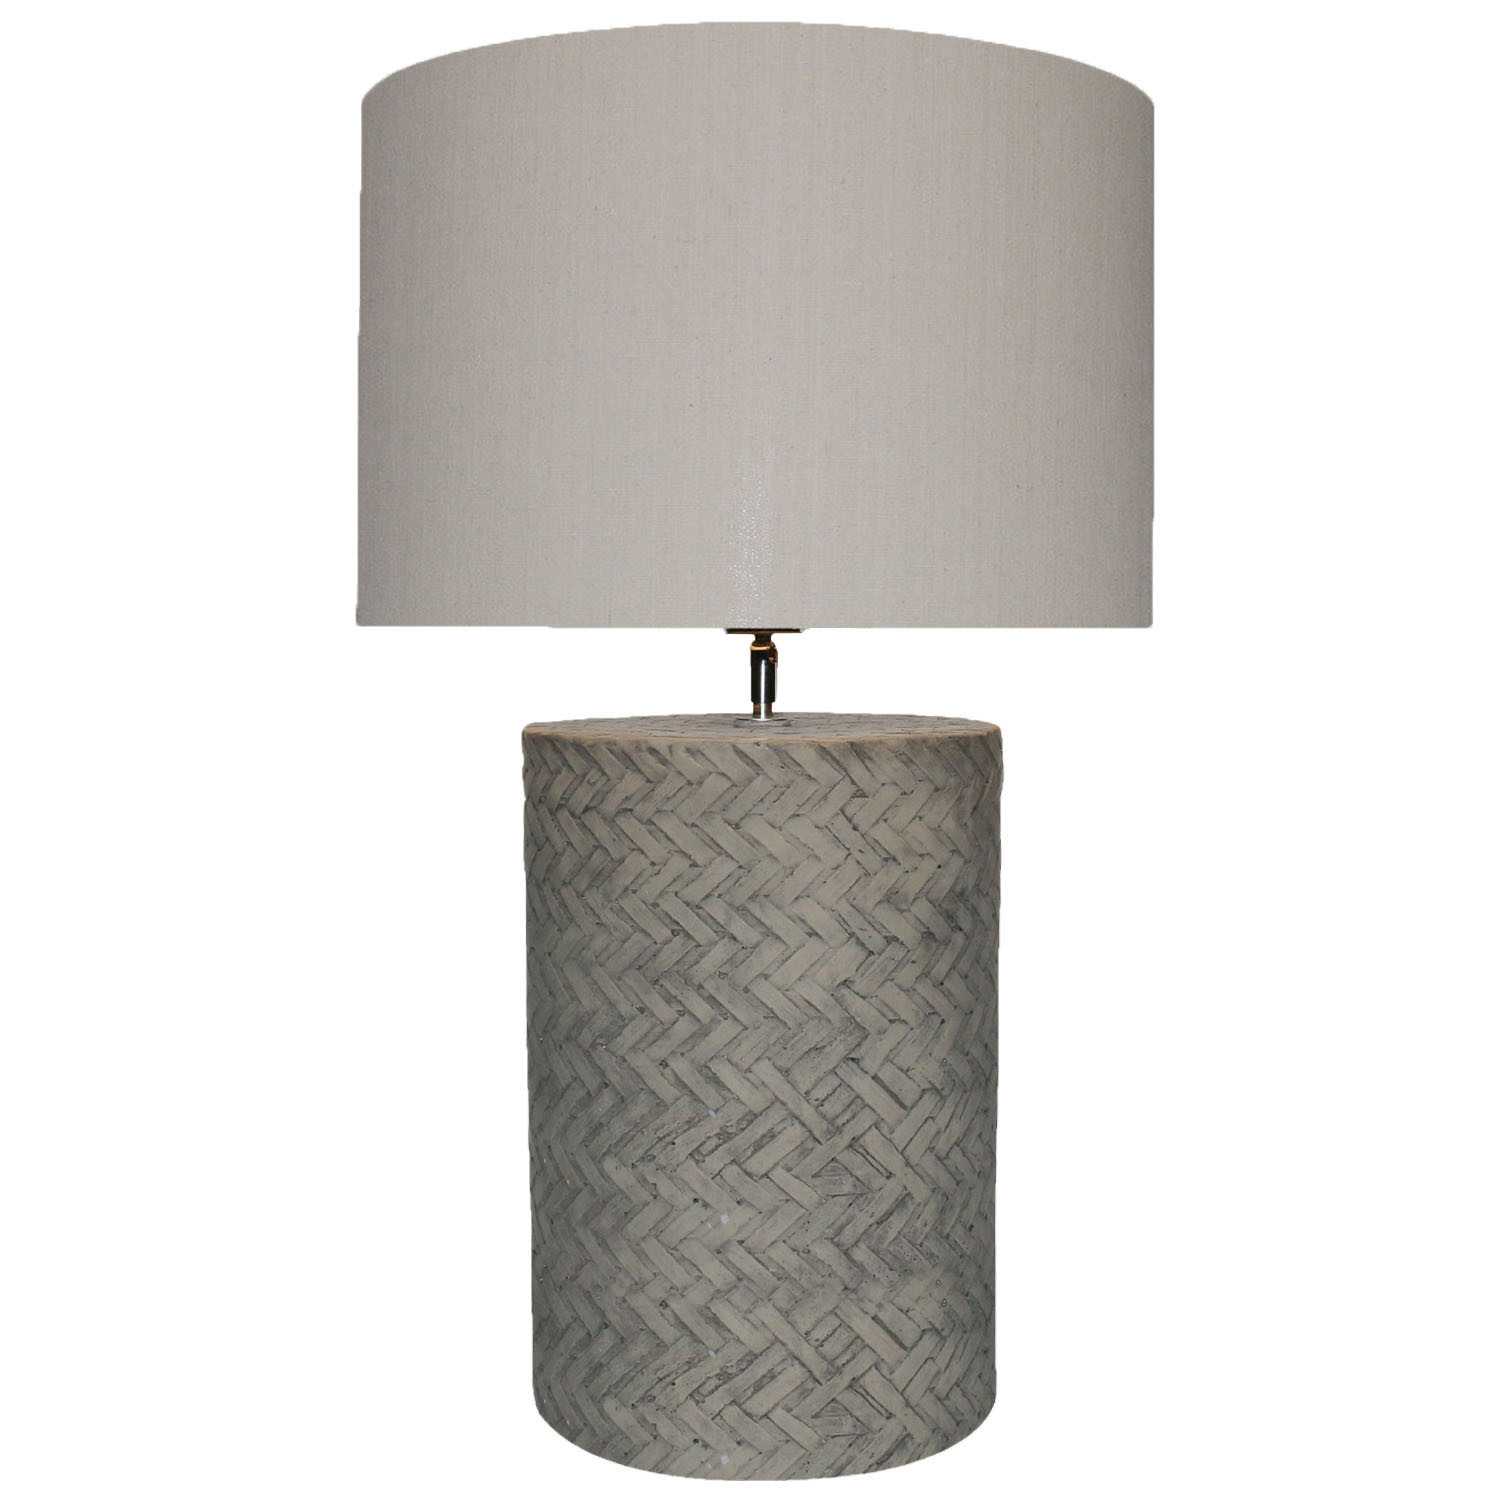 SH Summer Concrete Table Lamp with Lattice Pattern Finish